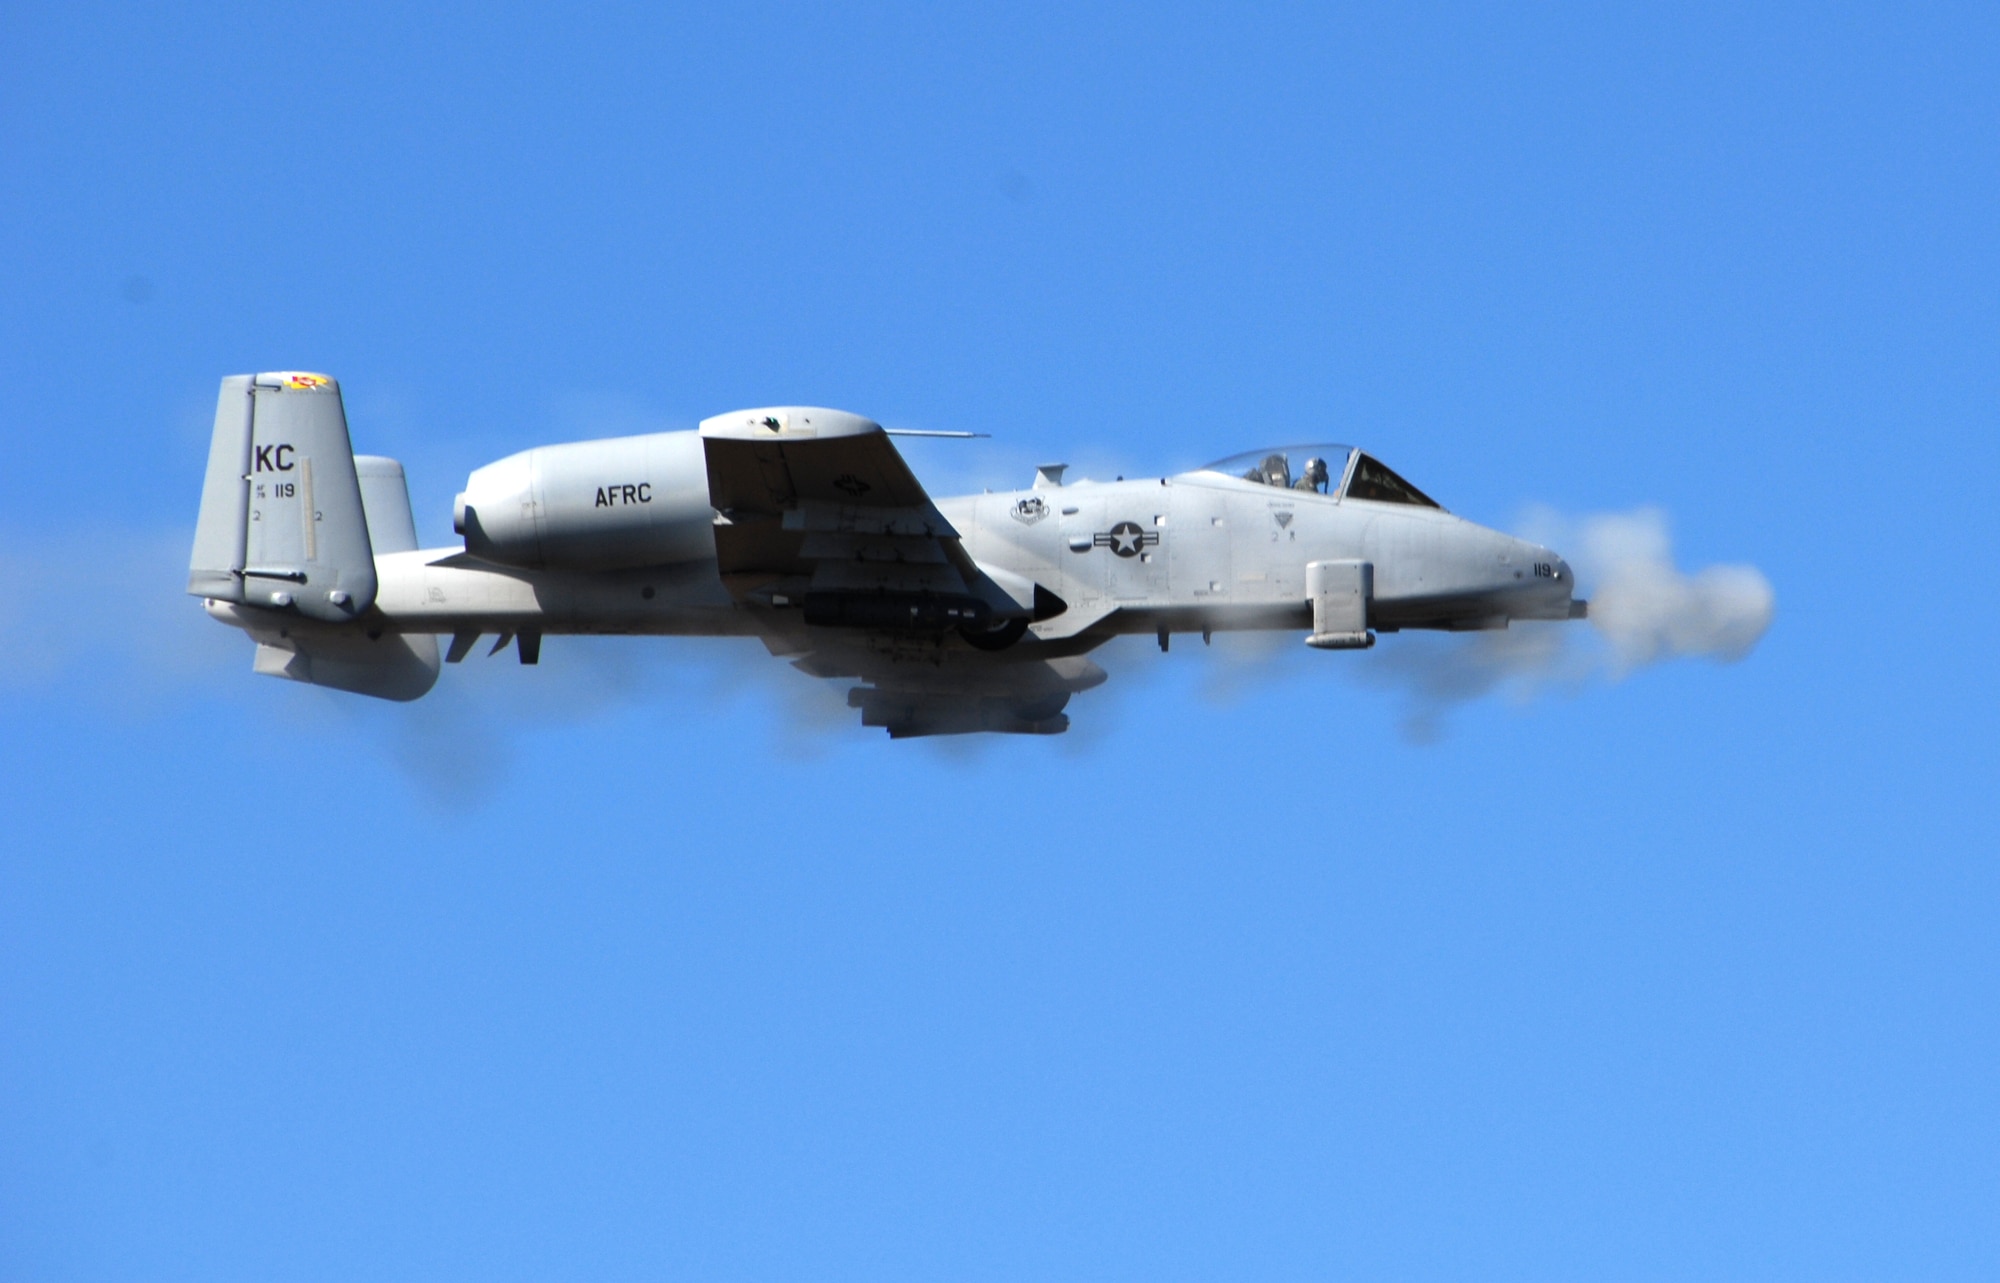 A pilot in an A-10 Thunderbolt II from the 442nd Fighter Wing fires the plane's 30-mm cannon at a target on the Smoky Hill Range near Salina, Kan., Oct. 16 during the gunnery portion of the Hawgsmoke 2008 competition.  Fourteen A-10 squadrons from throughout the Air Force participated in Hawgsmoke, with the Idaho Air National Guard's 190th Fighter Squadron taking honors as the top team.  (U.S. Air Force photo/Master Sgt. Bill Huntington.